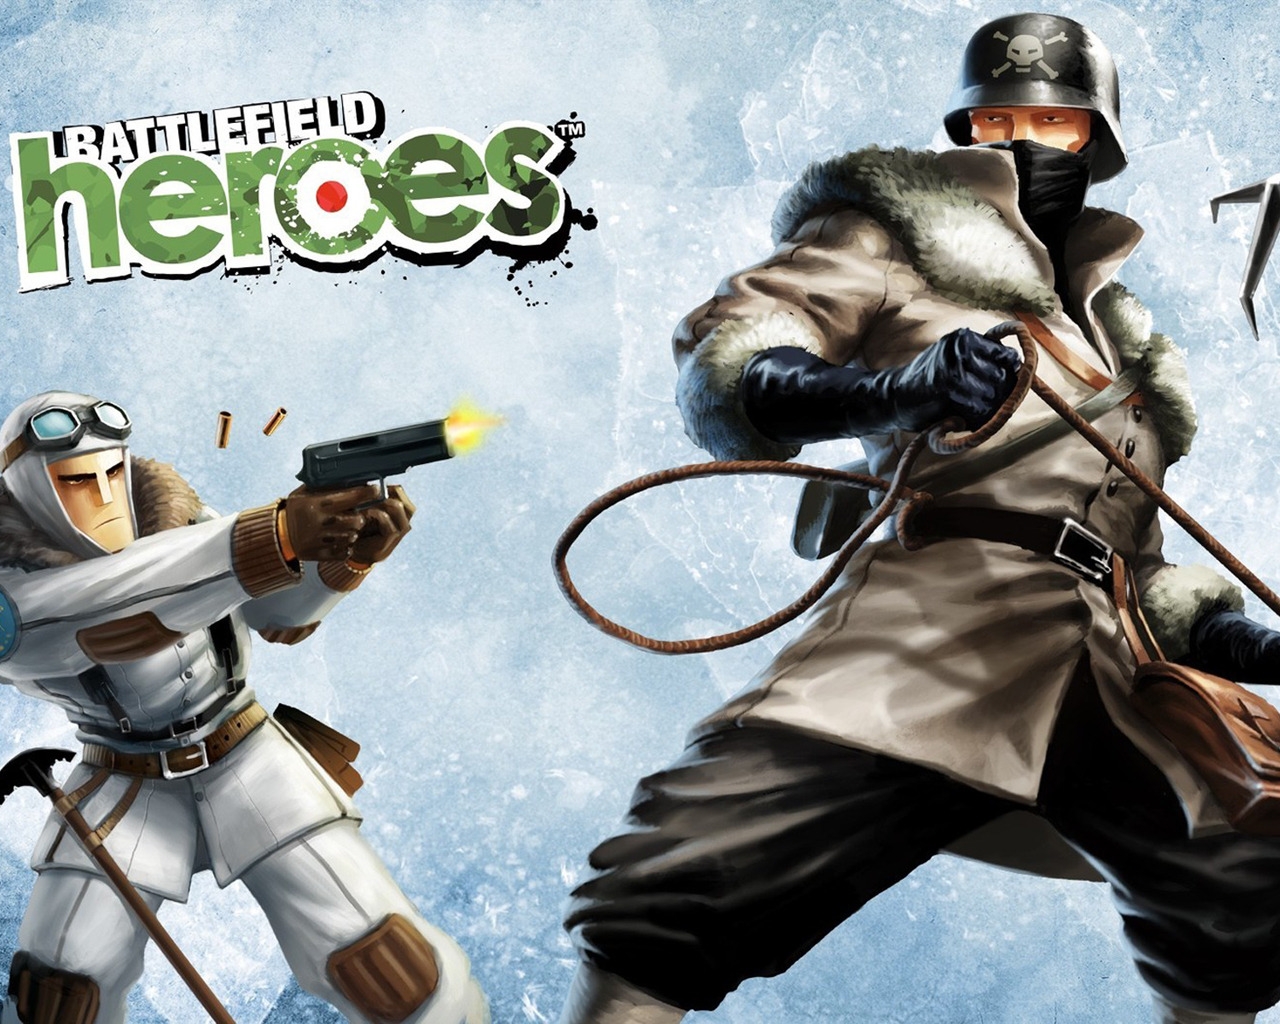 Battlefield Heroes for 1280 x 1024 resolution